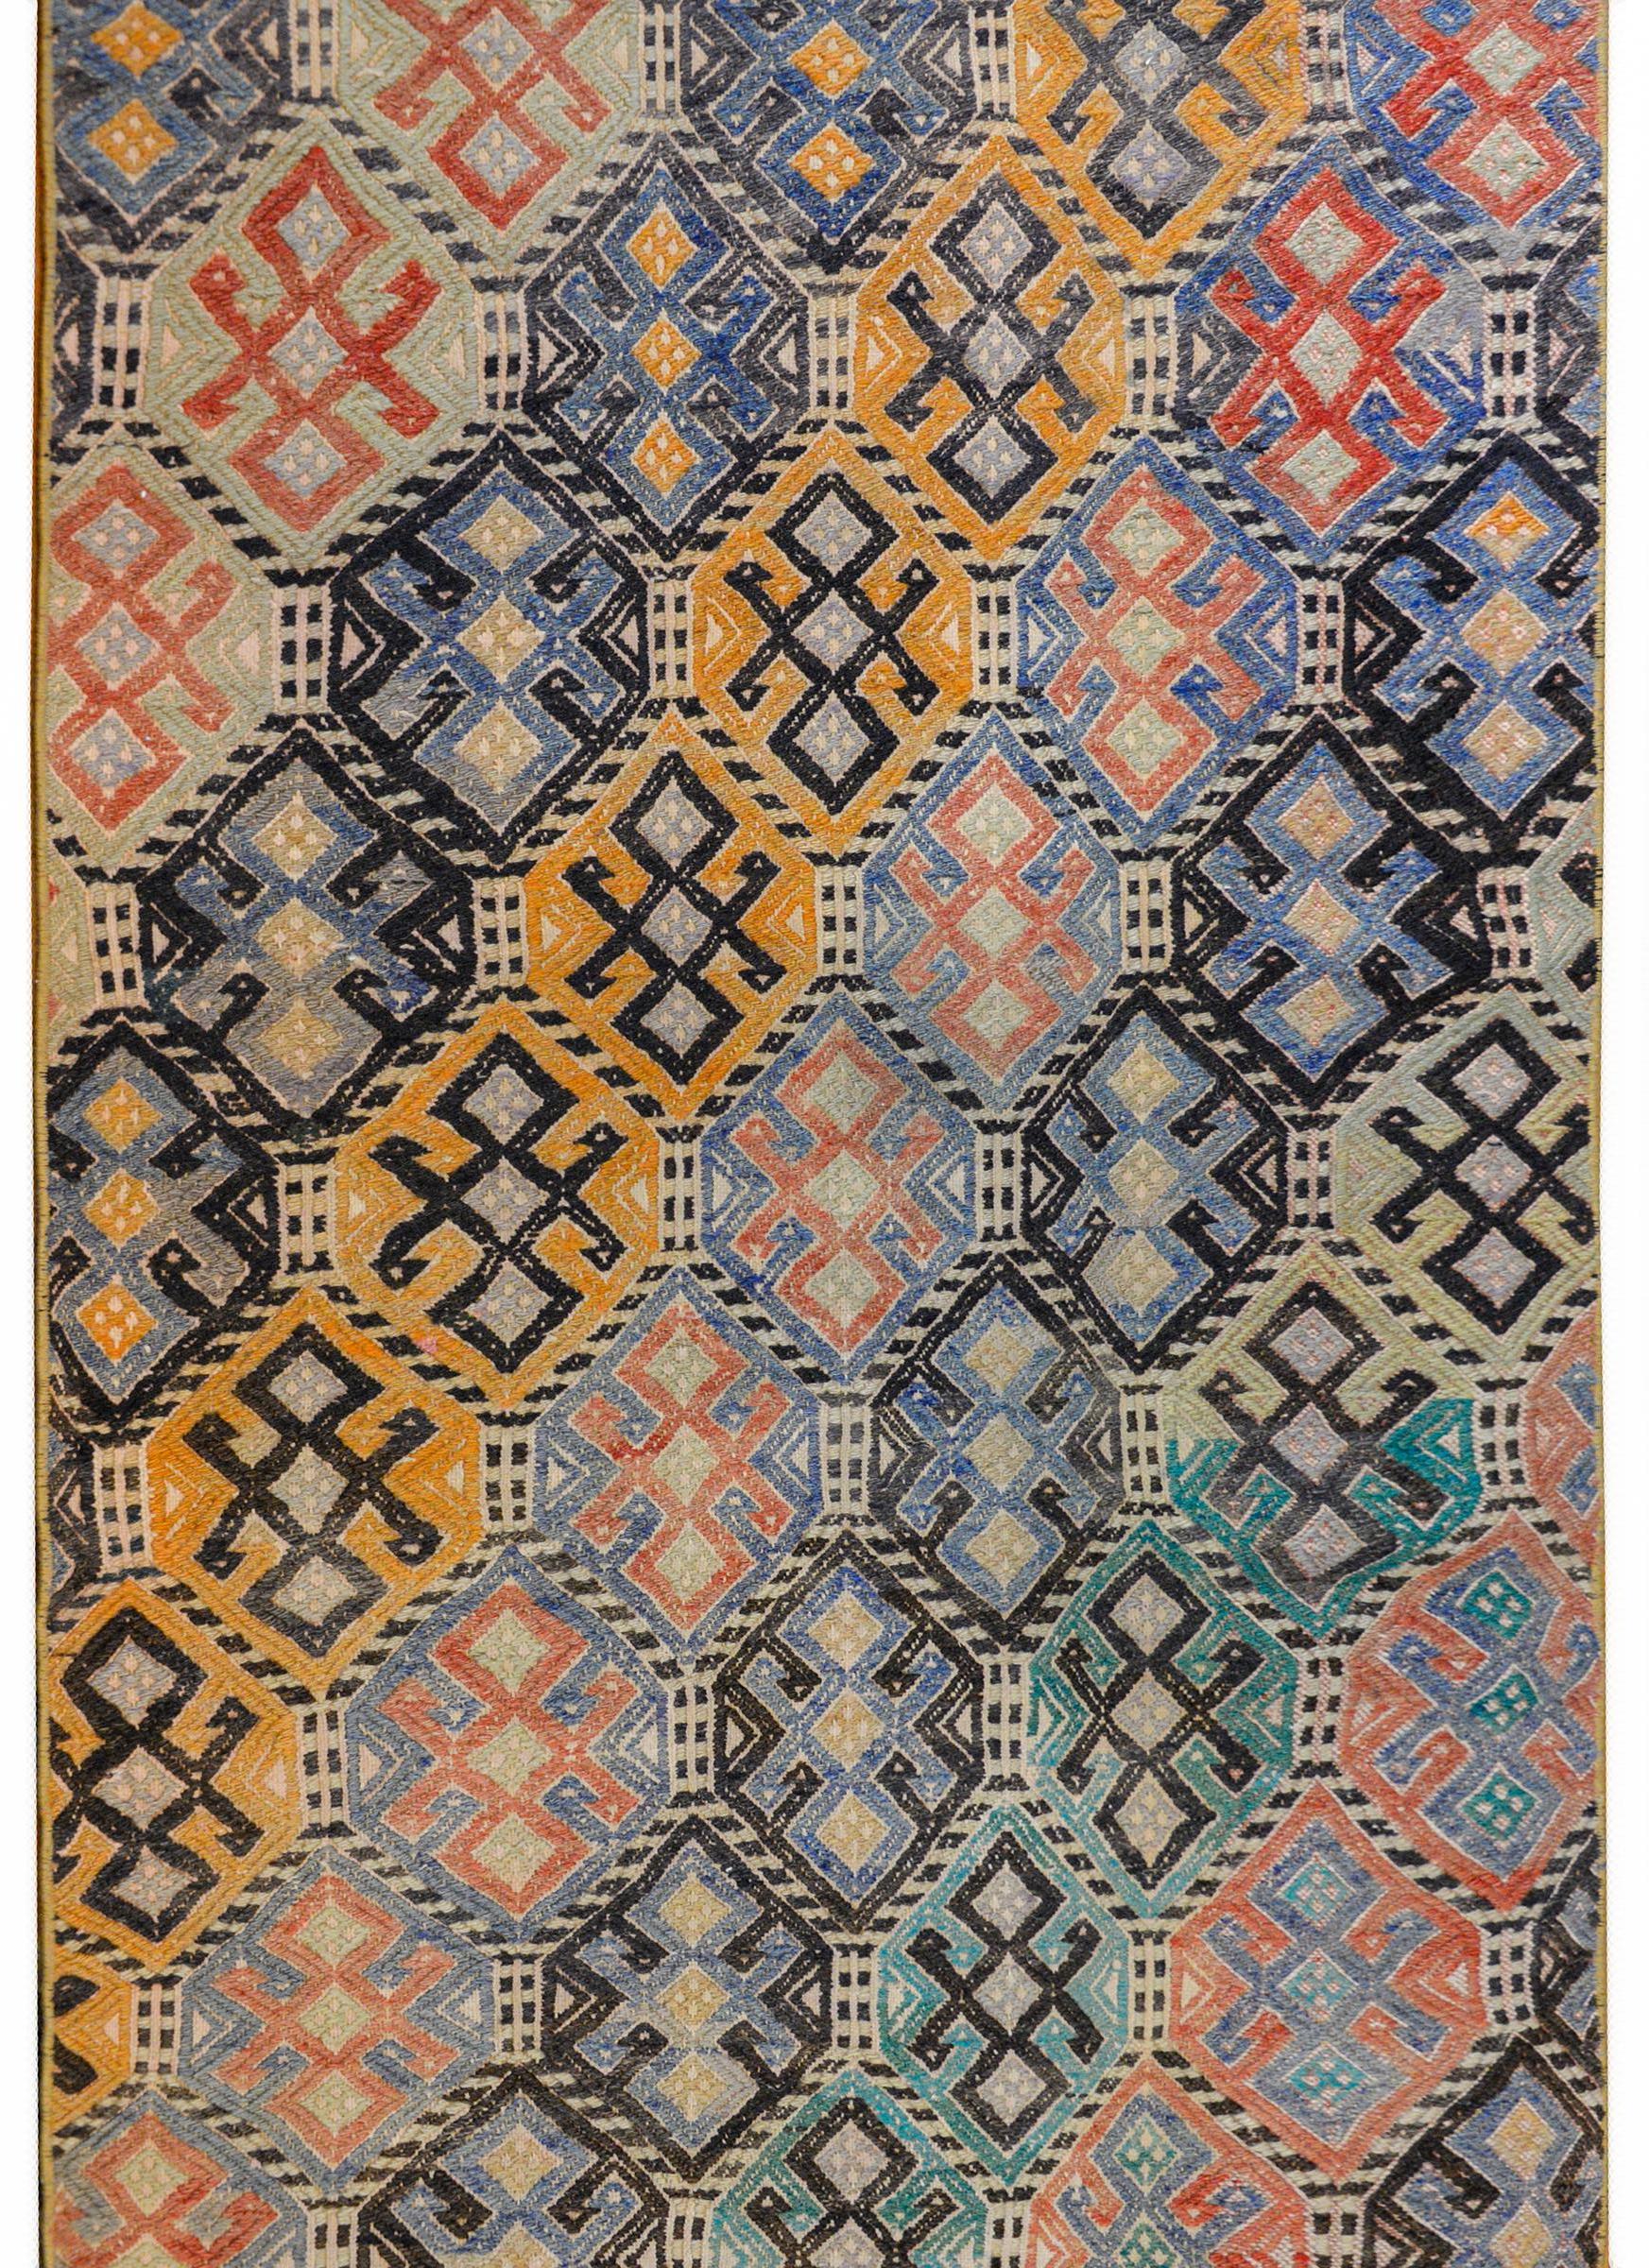 An outstanding vintage Turkish Cicim runner with an all-over pattern of geometric shapes woven in myriad colors like crimson, mint green, lavender, and gold, and organized in a striped pattern that runs diagonally across the field.